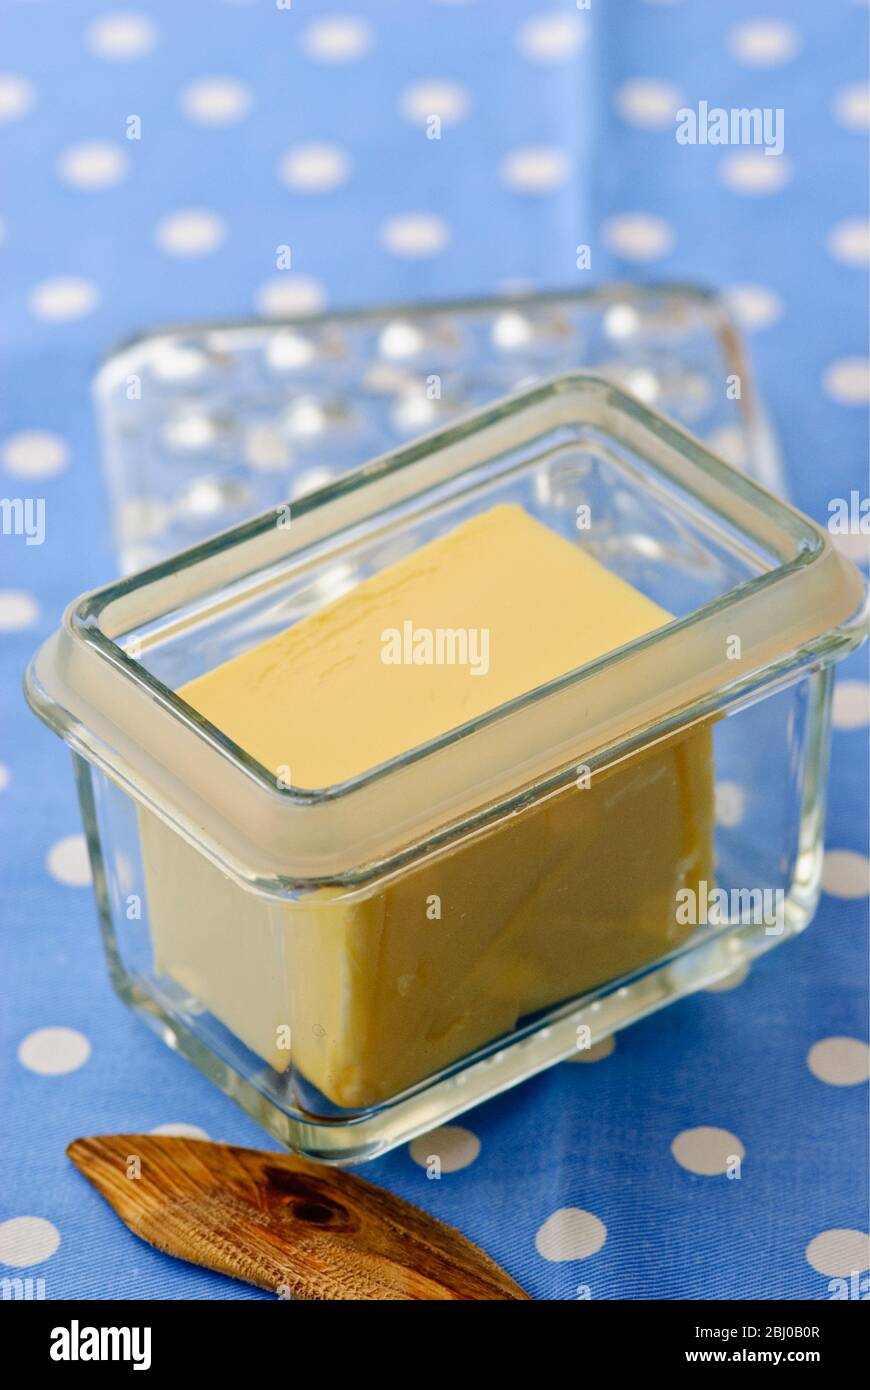 Glass butter dish of butter with butter knife on blue and white spotted cloth - Stock Photo